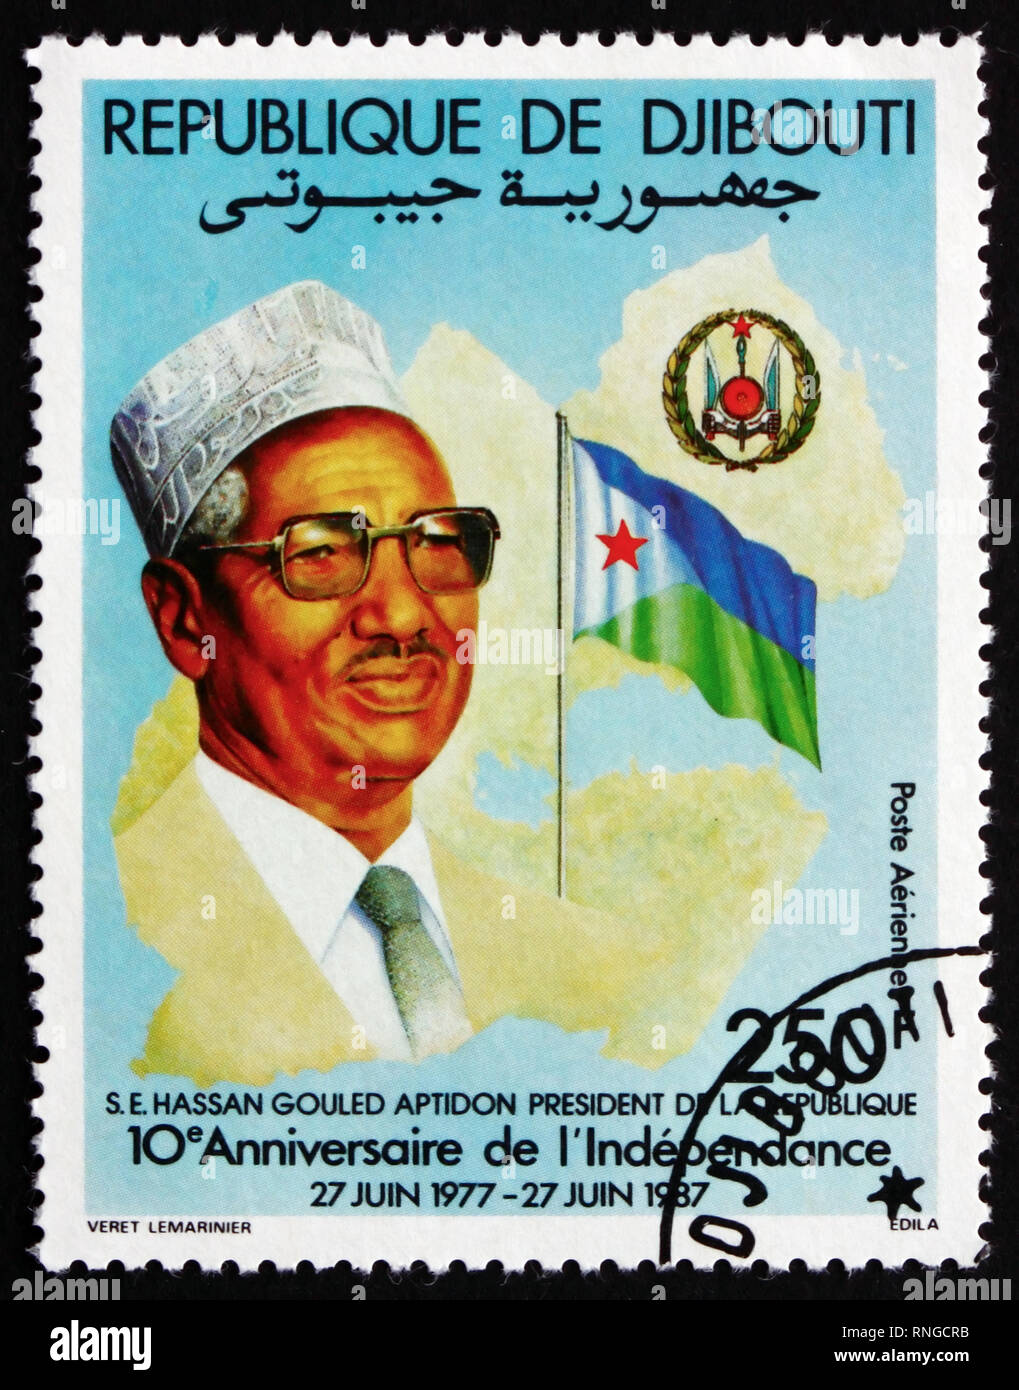 DJIBOUTI - CIRCA 1987: a stamp printed in the Djibouti shows President Hassan Gouled Aptidon, National Crest and Flag, 10th Anniversary of the Nationa Stock Photo